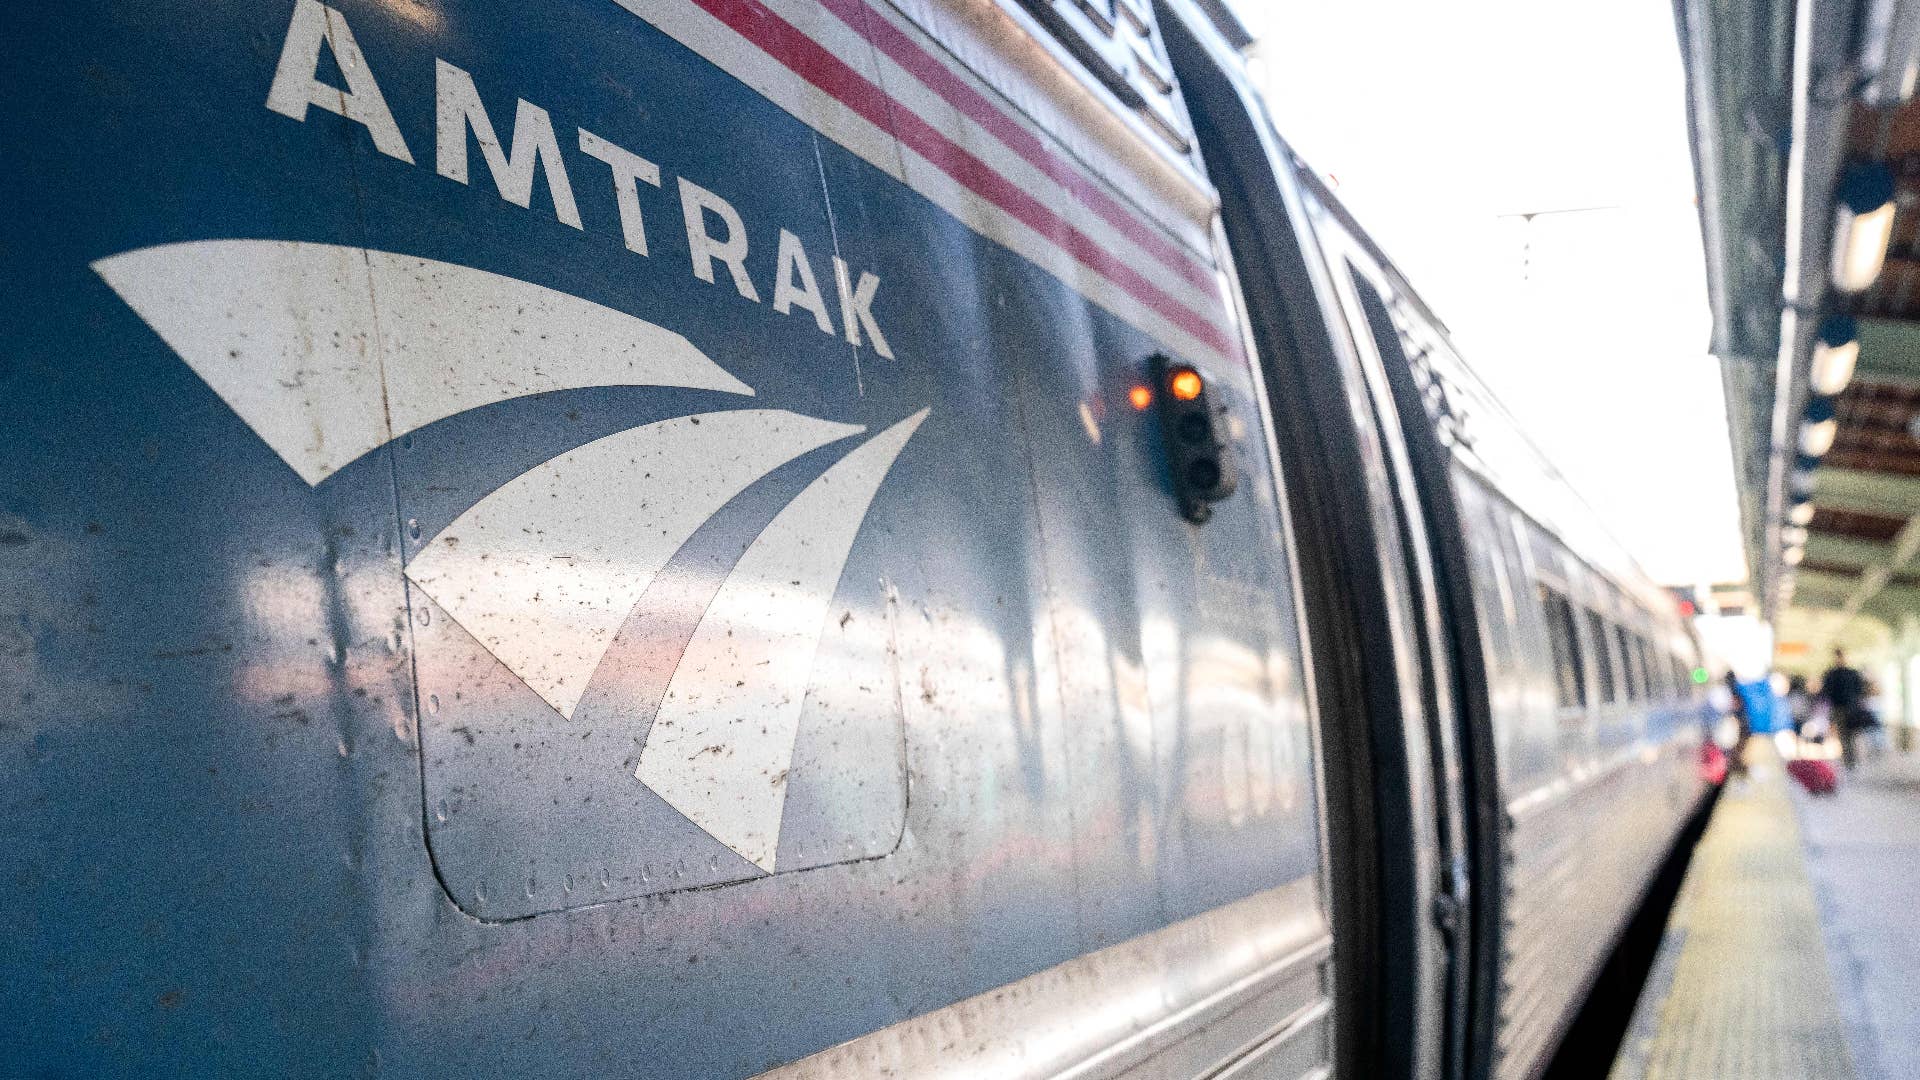 The Amtrak logo is seen on a train at station.